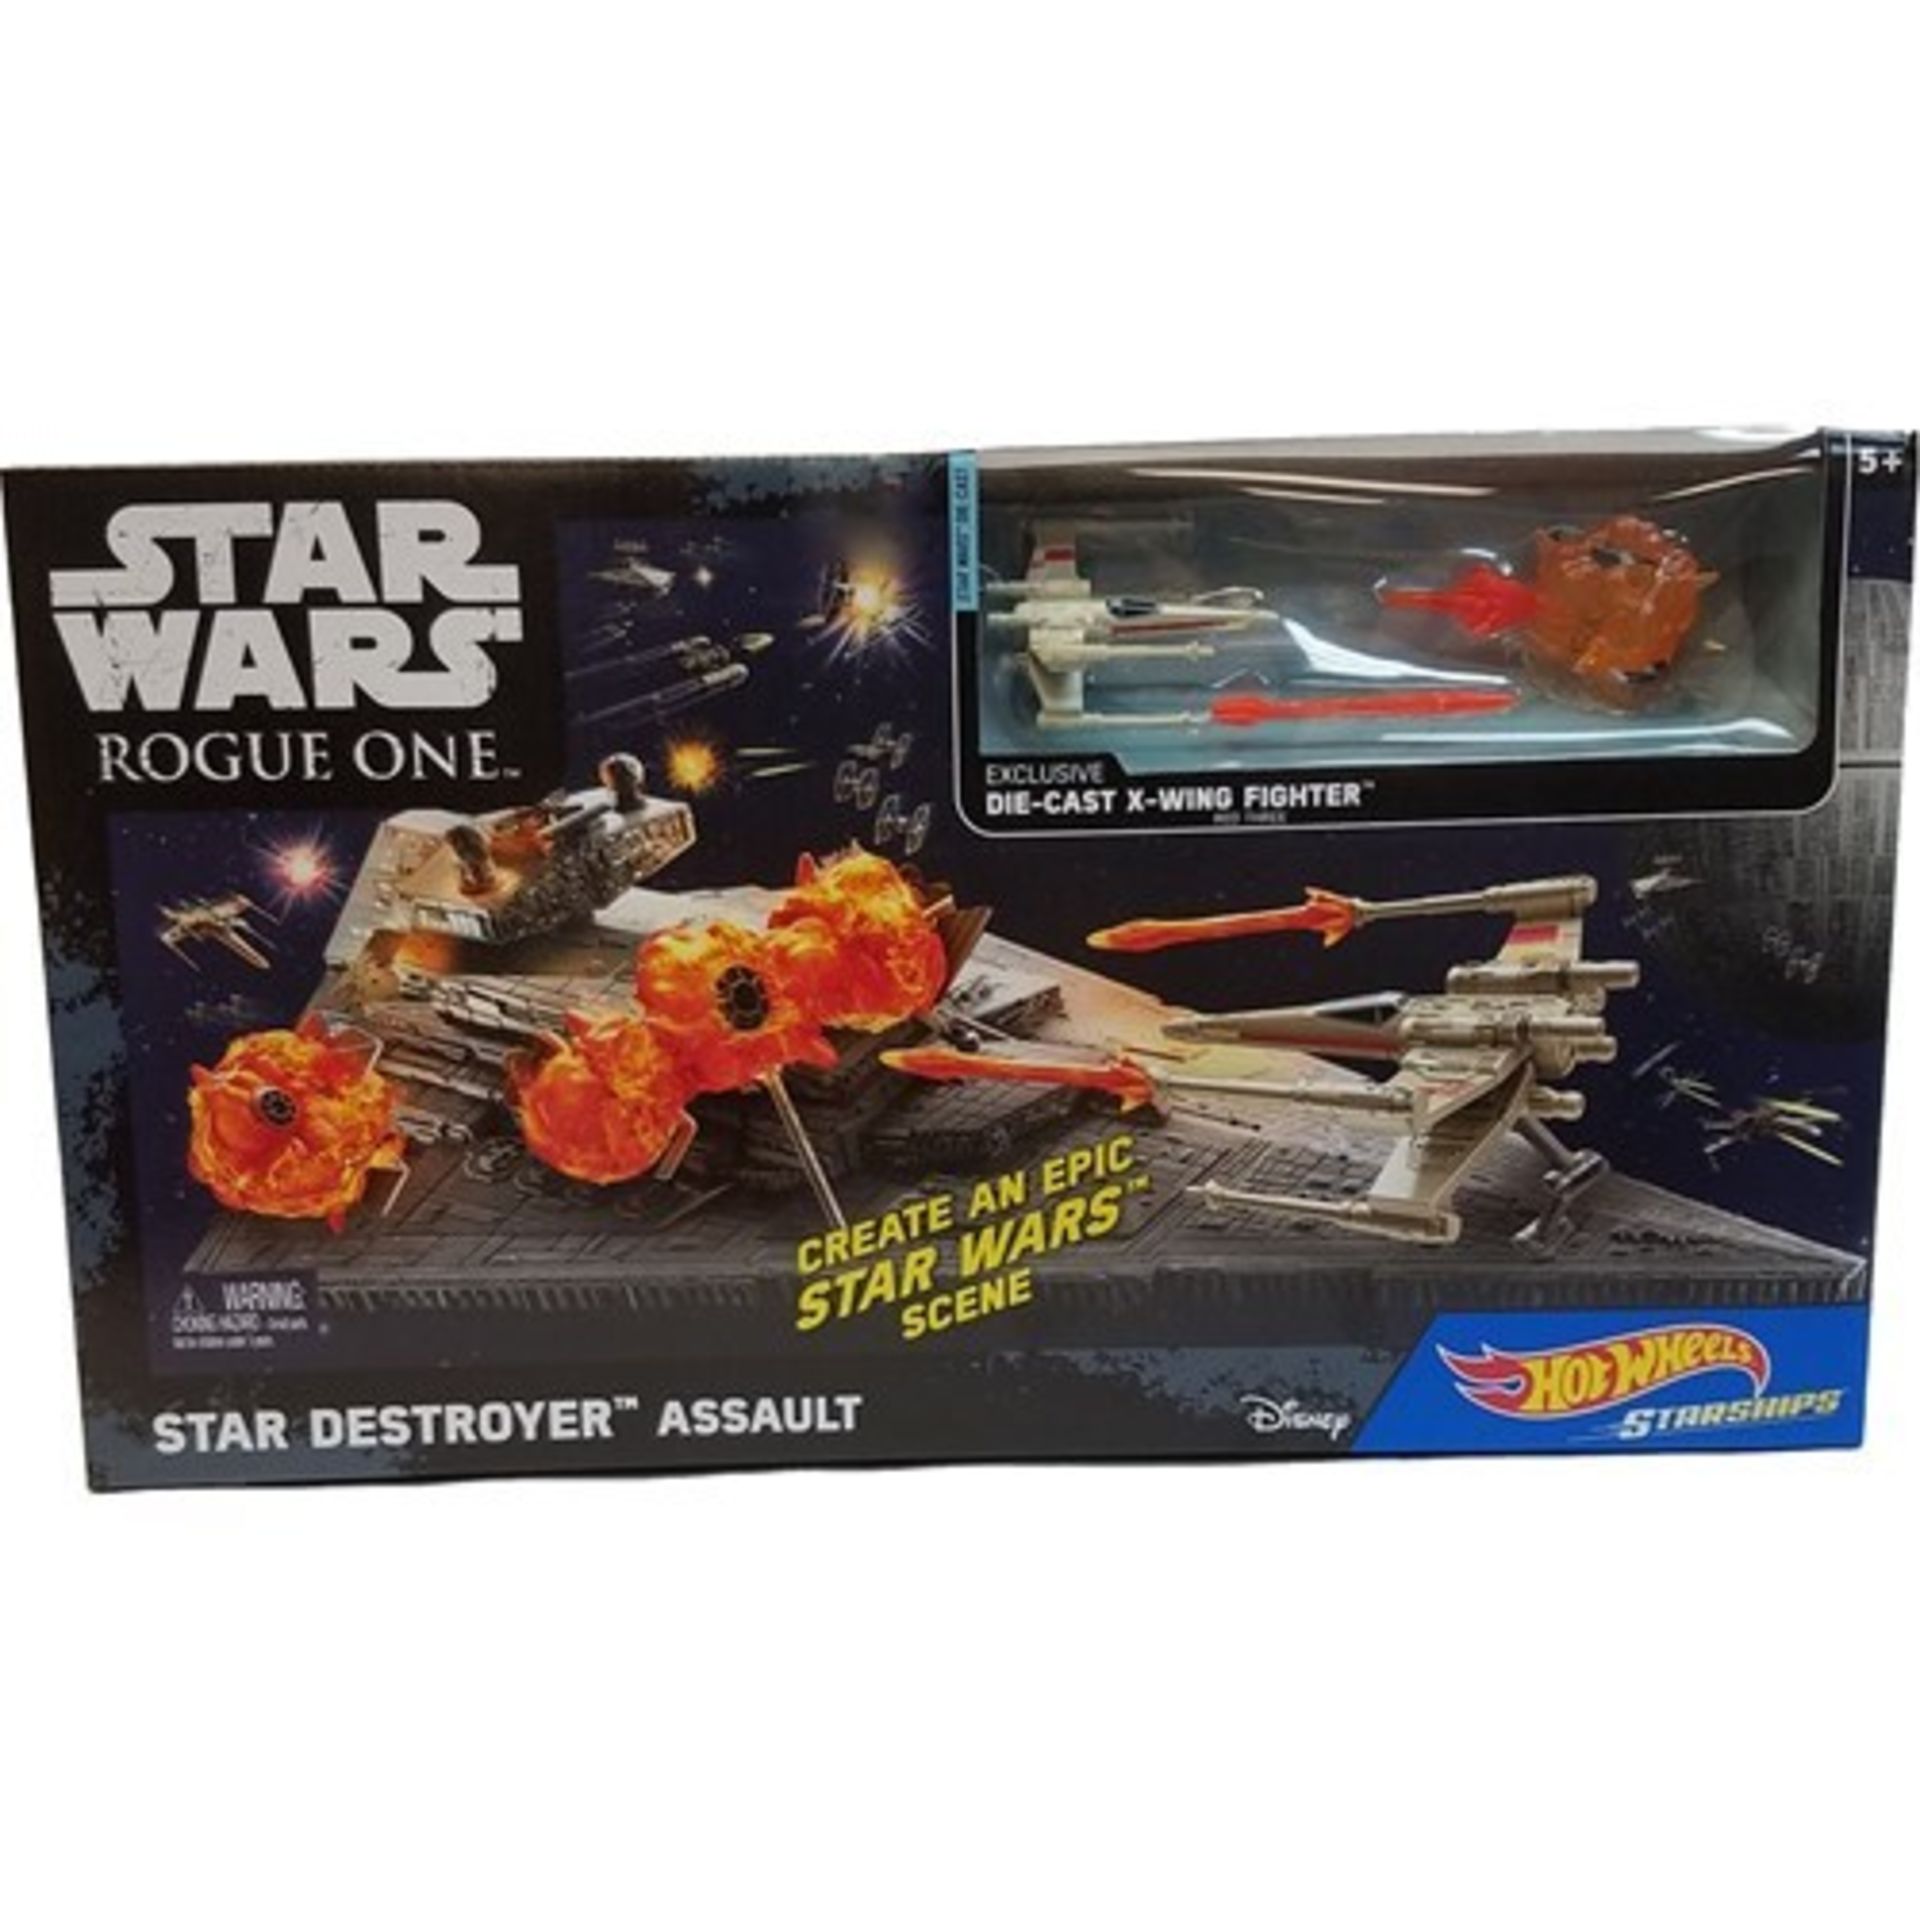 + VAT Brand New Hot Wheels Star Wars Rogue One Star Destroyer Assault - 20 Pieces Included - - Image 2 of 4